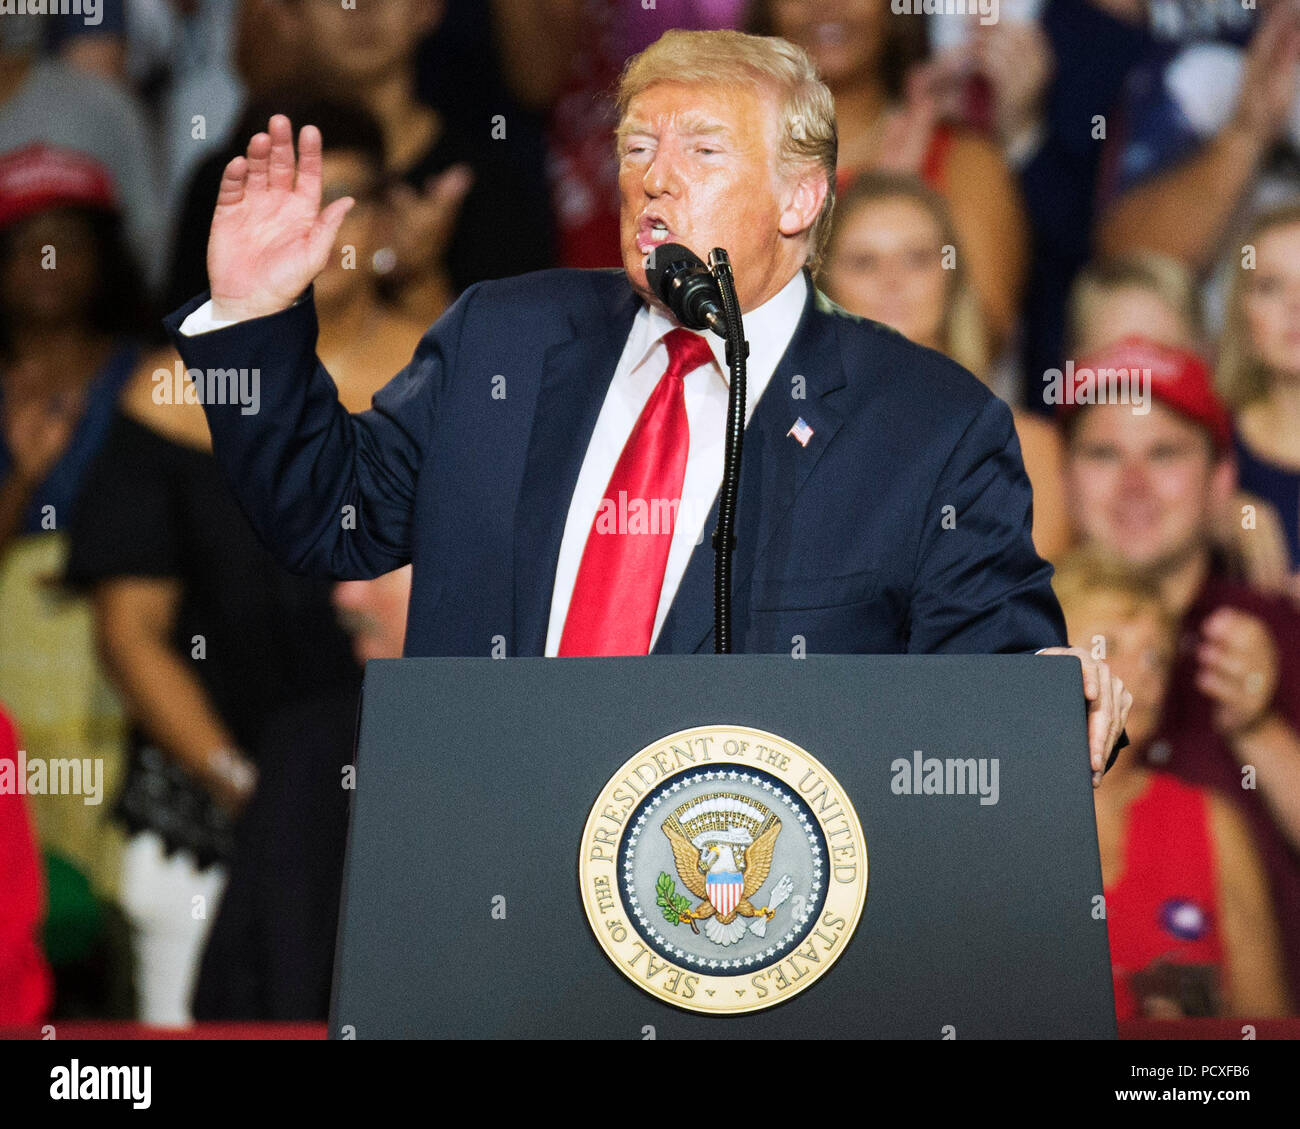 Ohio, USA. 4 August 2018. Donald Trump speaks to the crowd at the Make America Great Again Rally in Powell, Ohio USA. Brent Clark/Alamy Live News Stock Photo